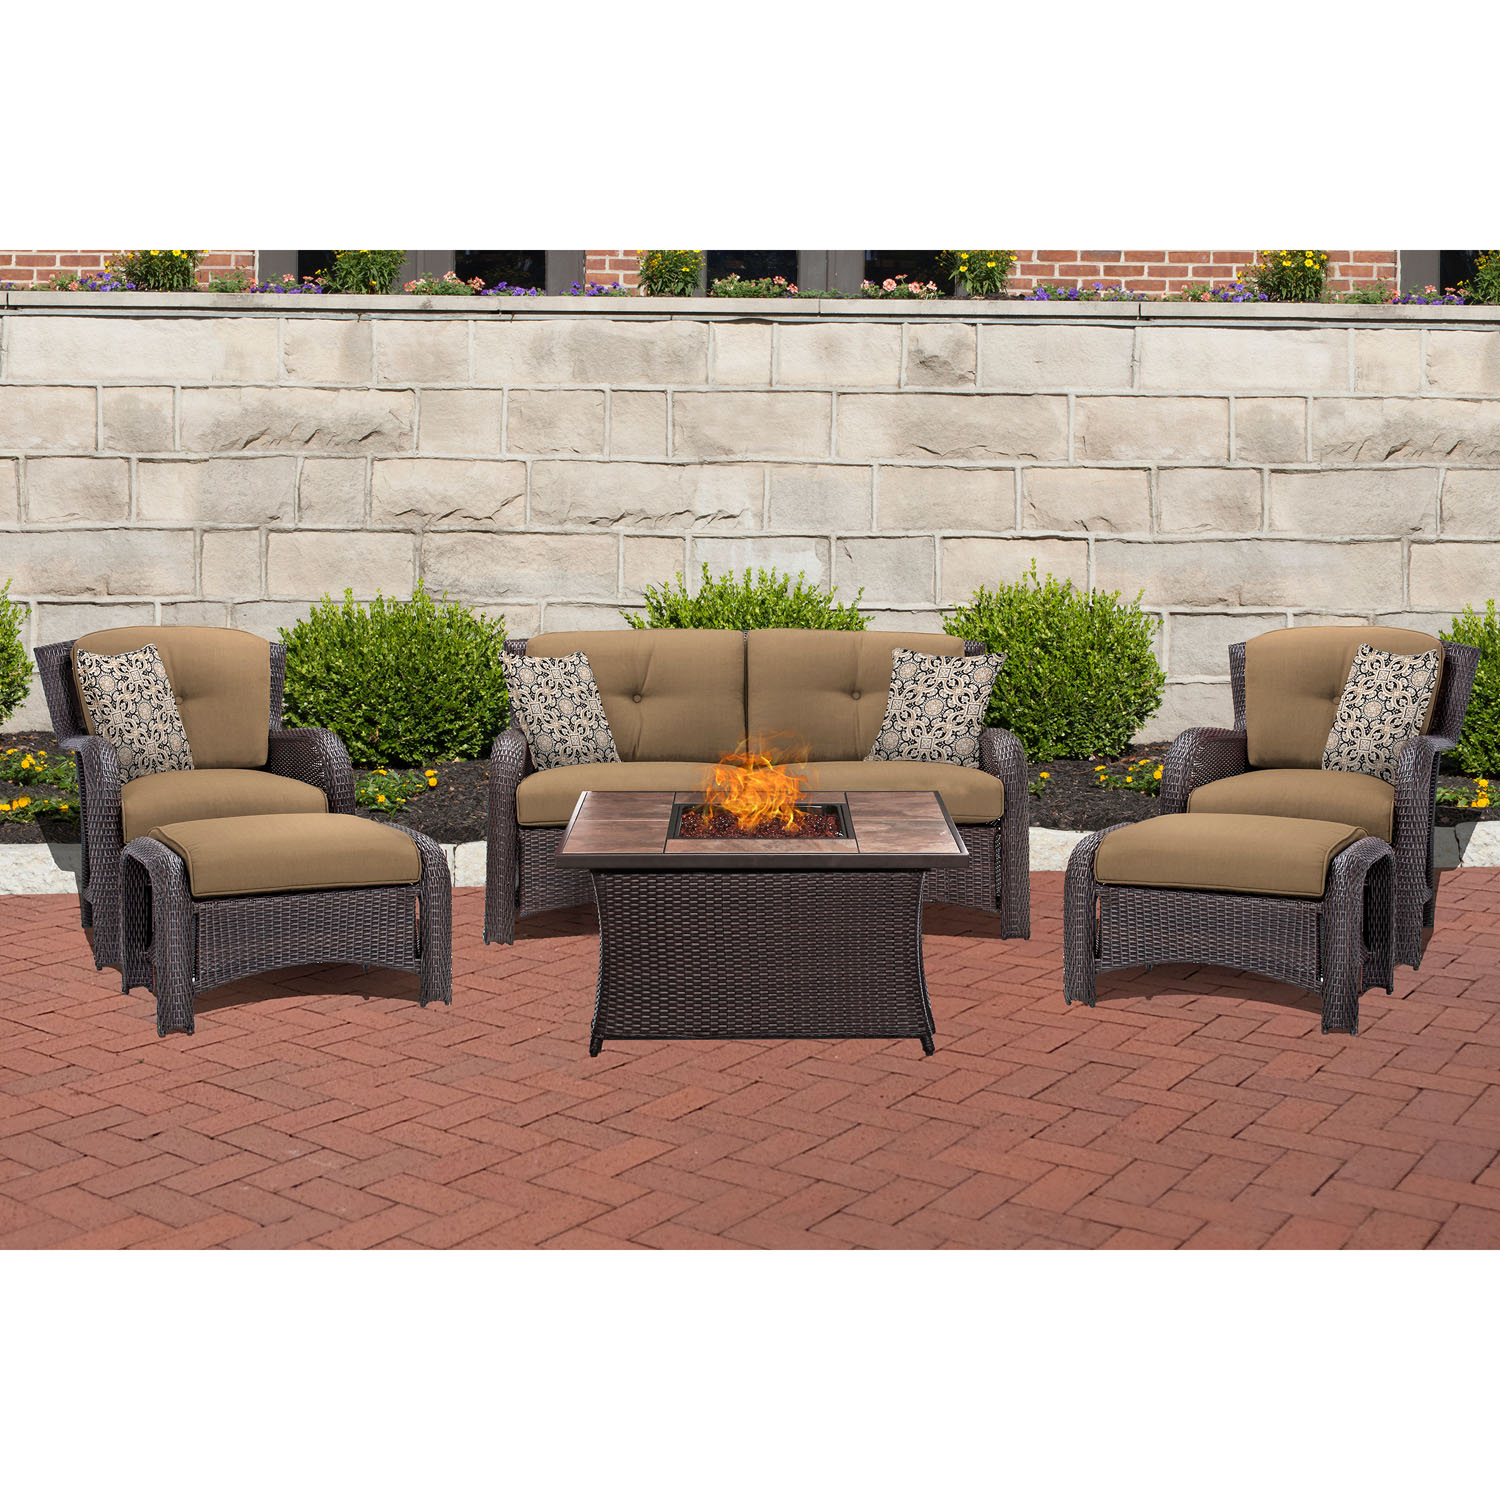 Hanover Strathmere 6-Piece Fire Pit Lounge Set with Faux-Stone Tile Top - image 1 of 9